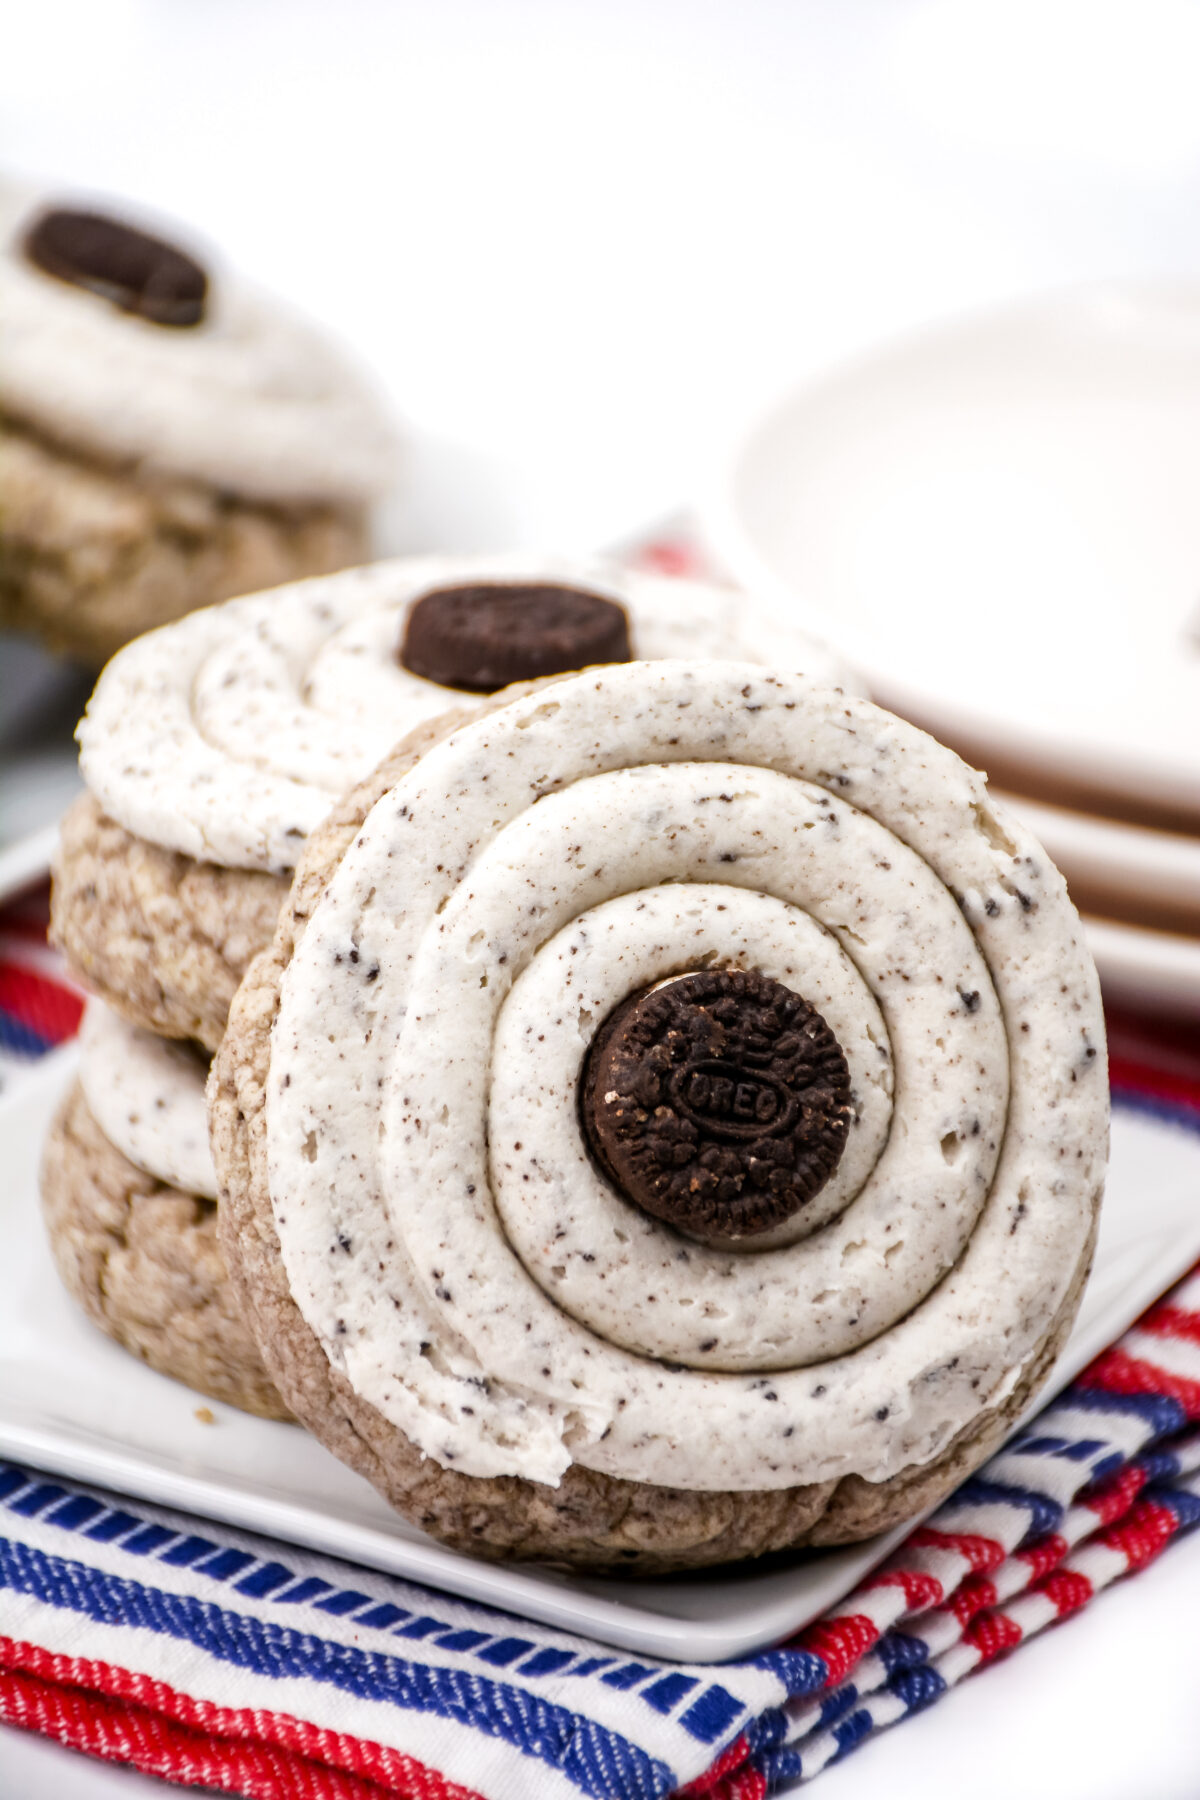 Love the soft and chewy Crumbl Cookies and Cream Milkshake cookies? Here's how to make them at home with our copycat recipe!